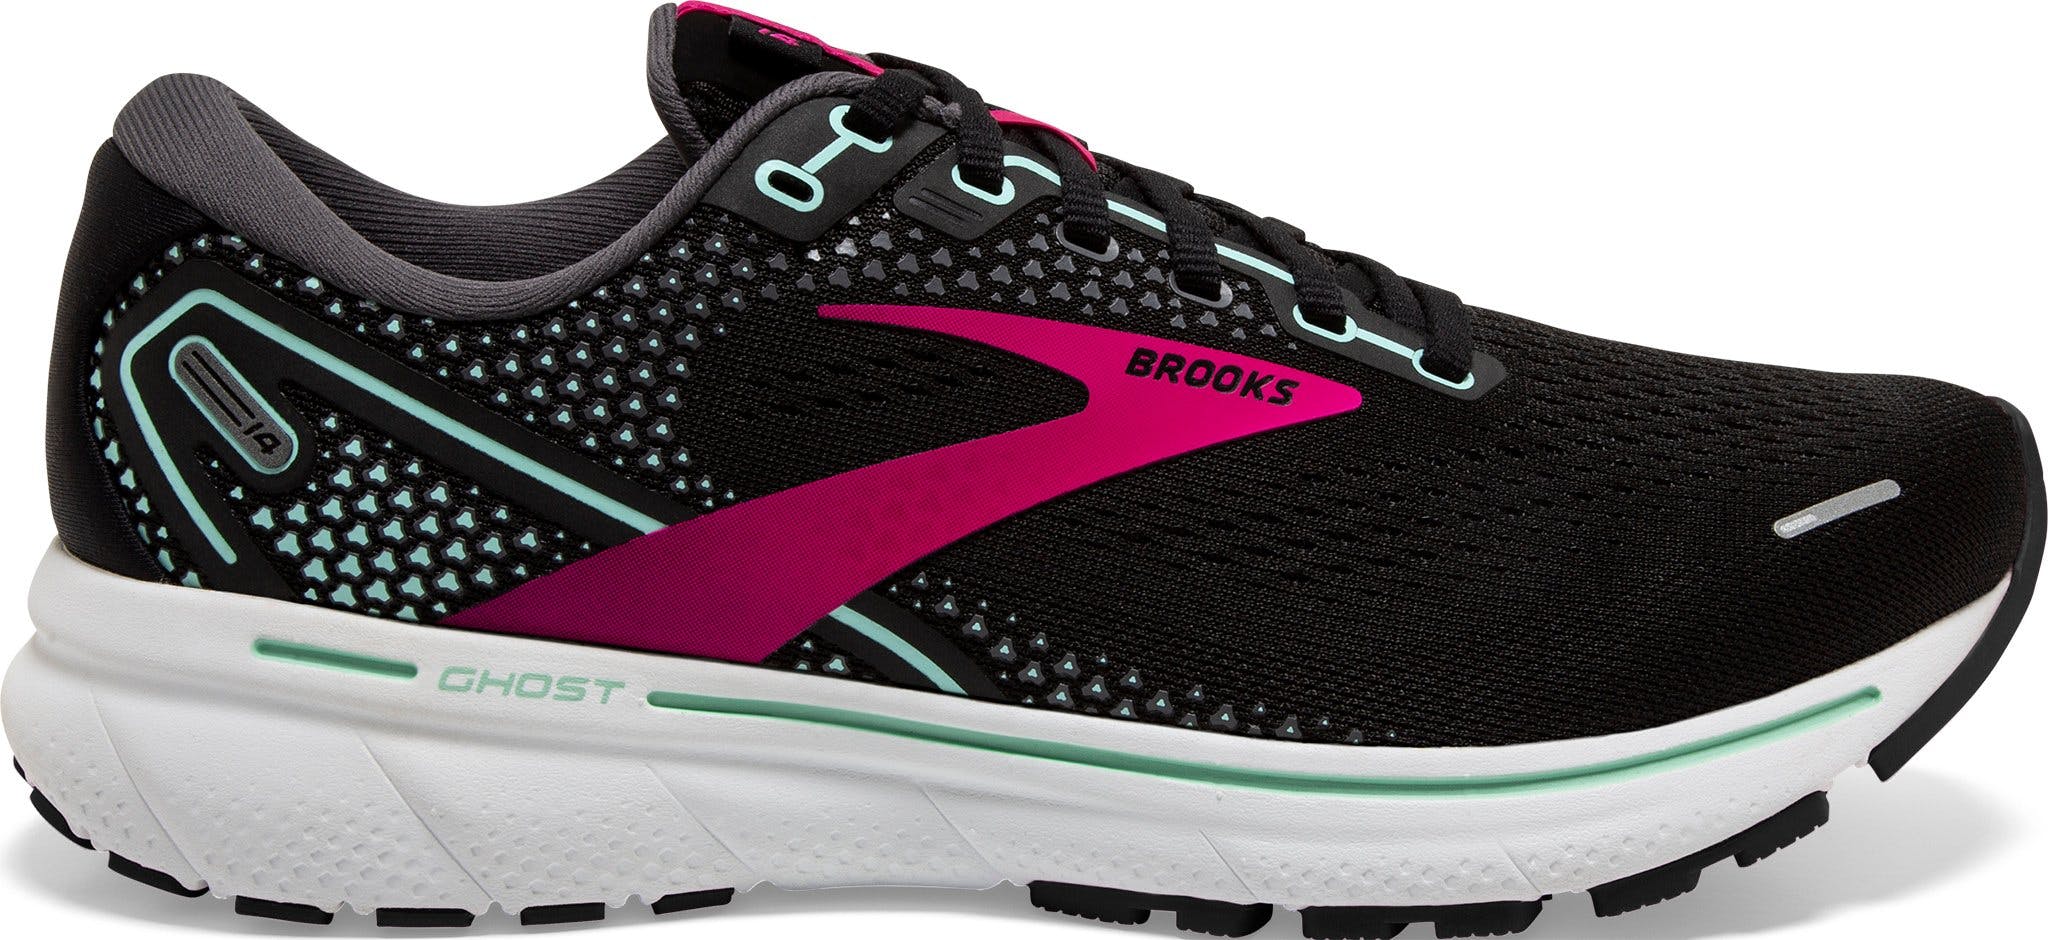 Product image for Ghost 14 Running Shoes [Wide] - Women's